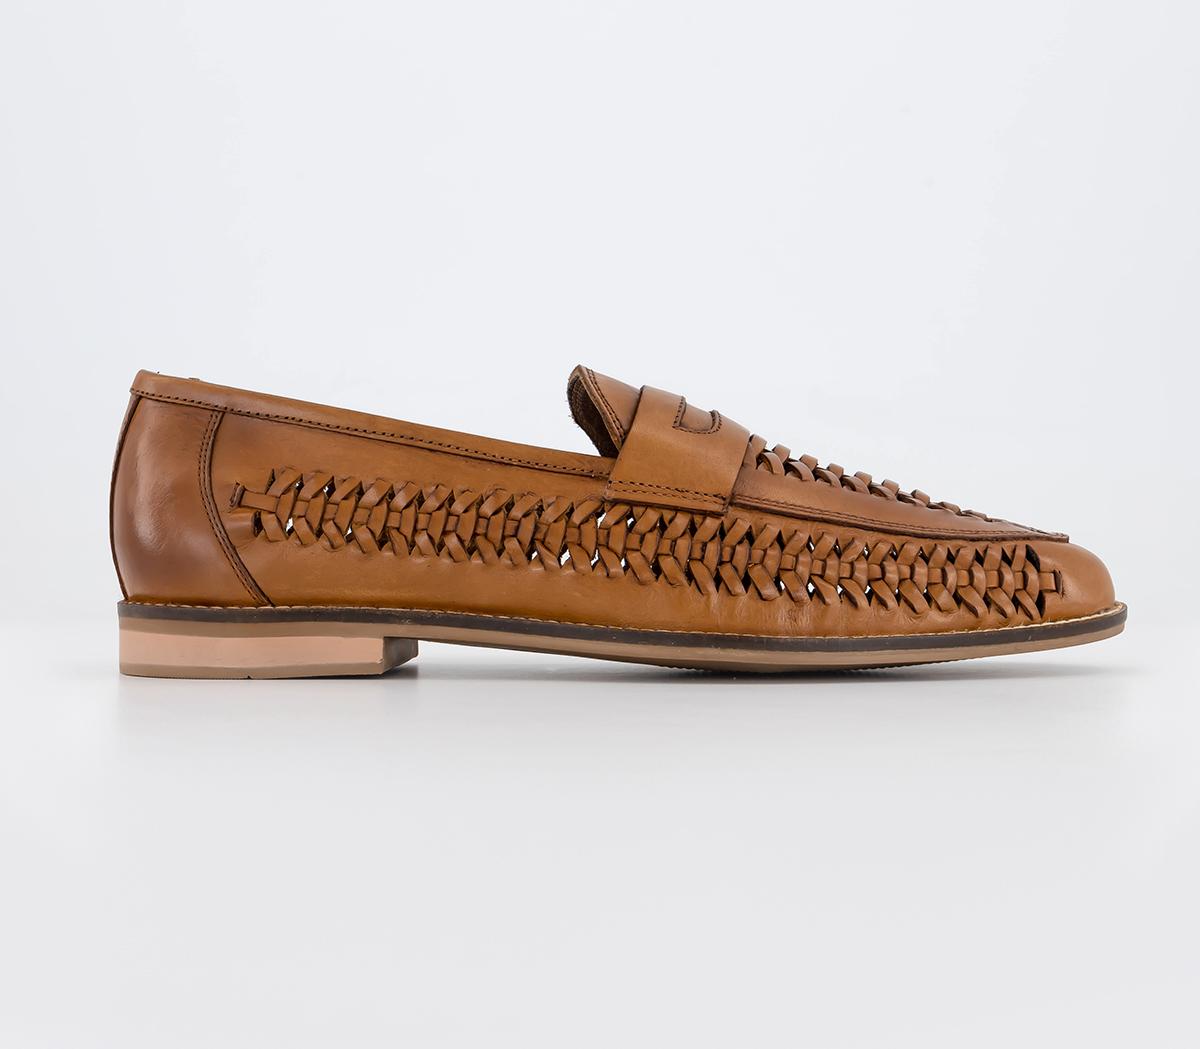 OFFICE Chiswick - 2 Woven Saddle Shoes Tan Leather - Men's Casual Shoes